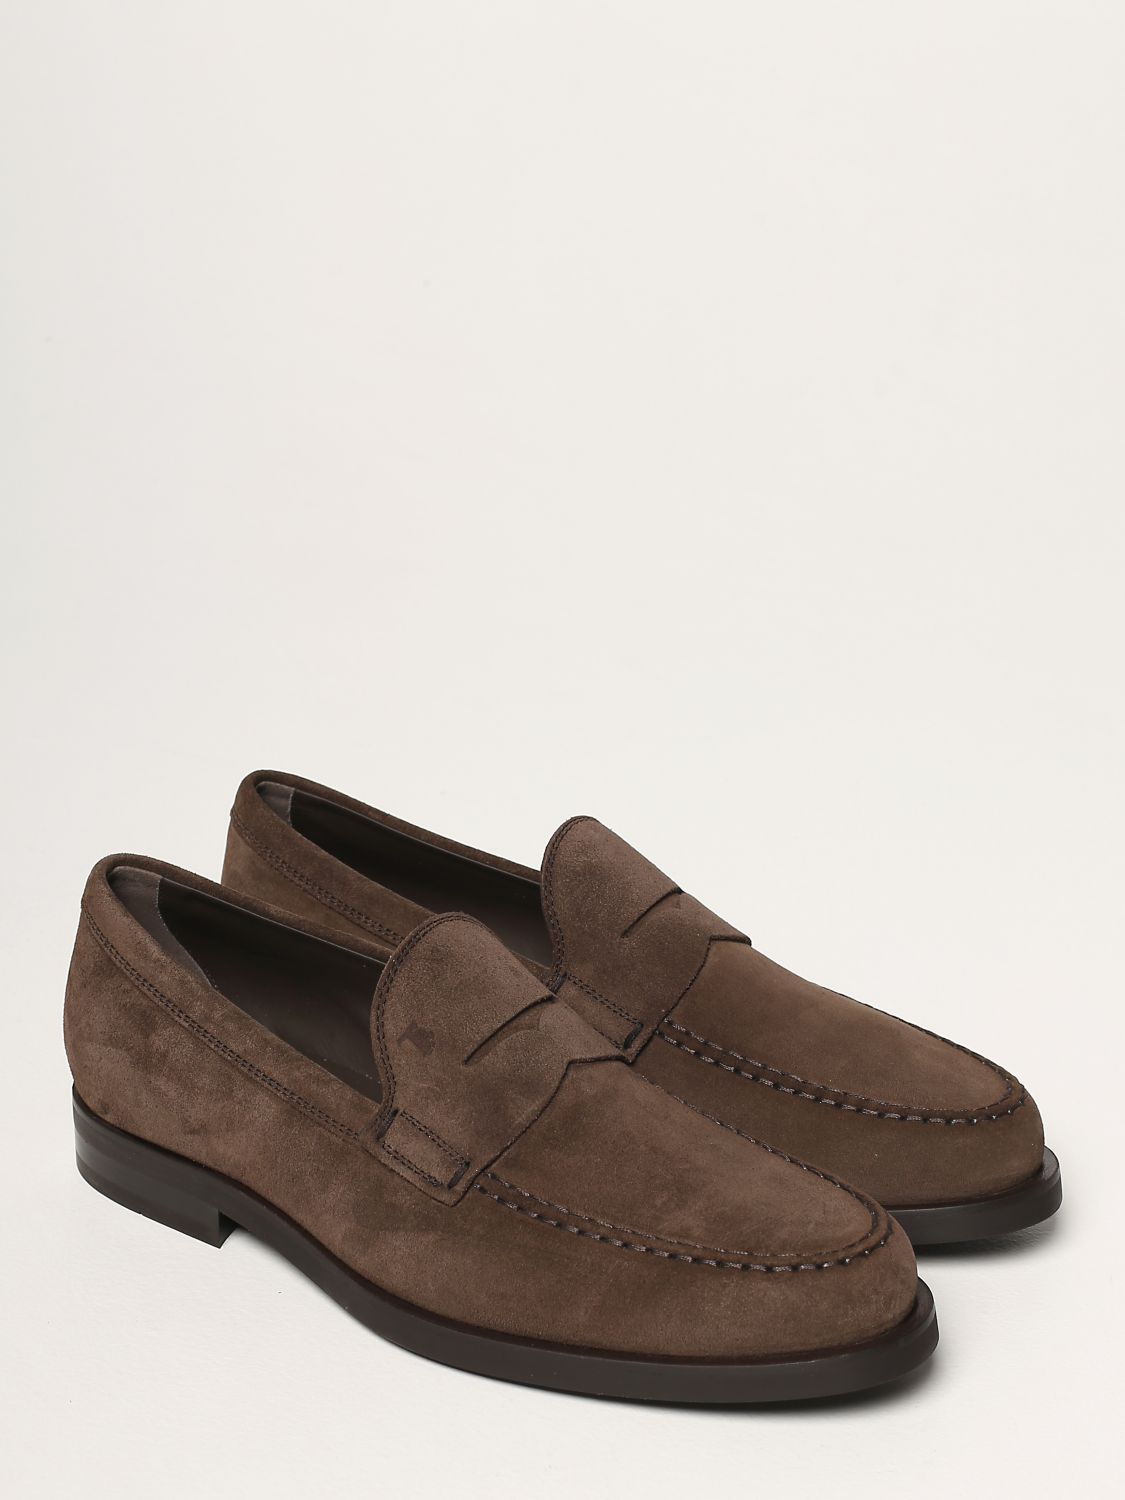 Mocassins Tod's: Chaussures homme Tod's brun 2